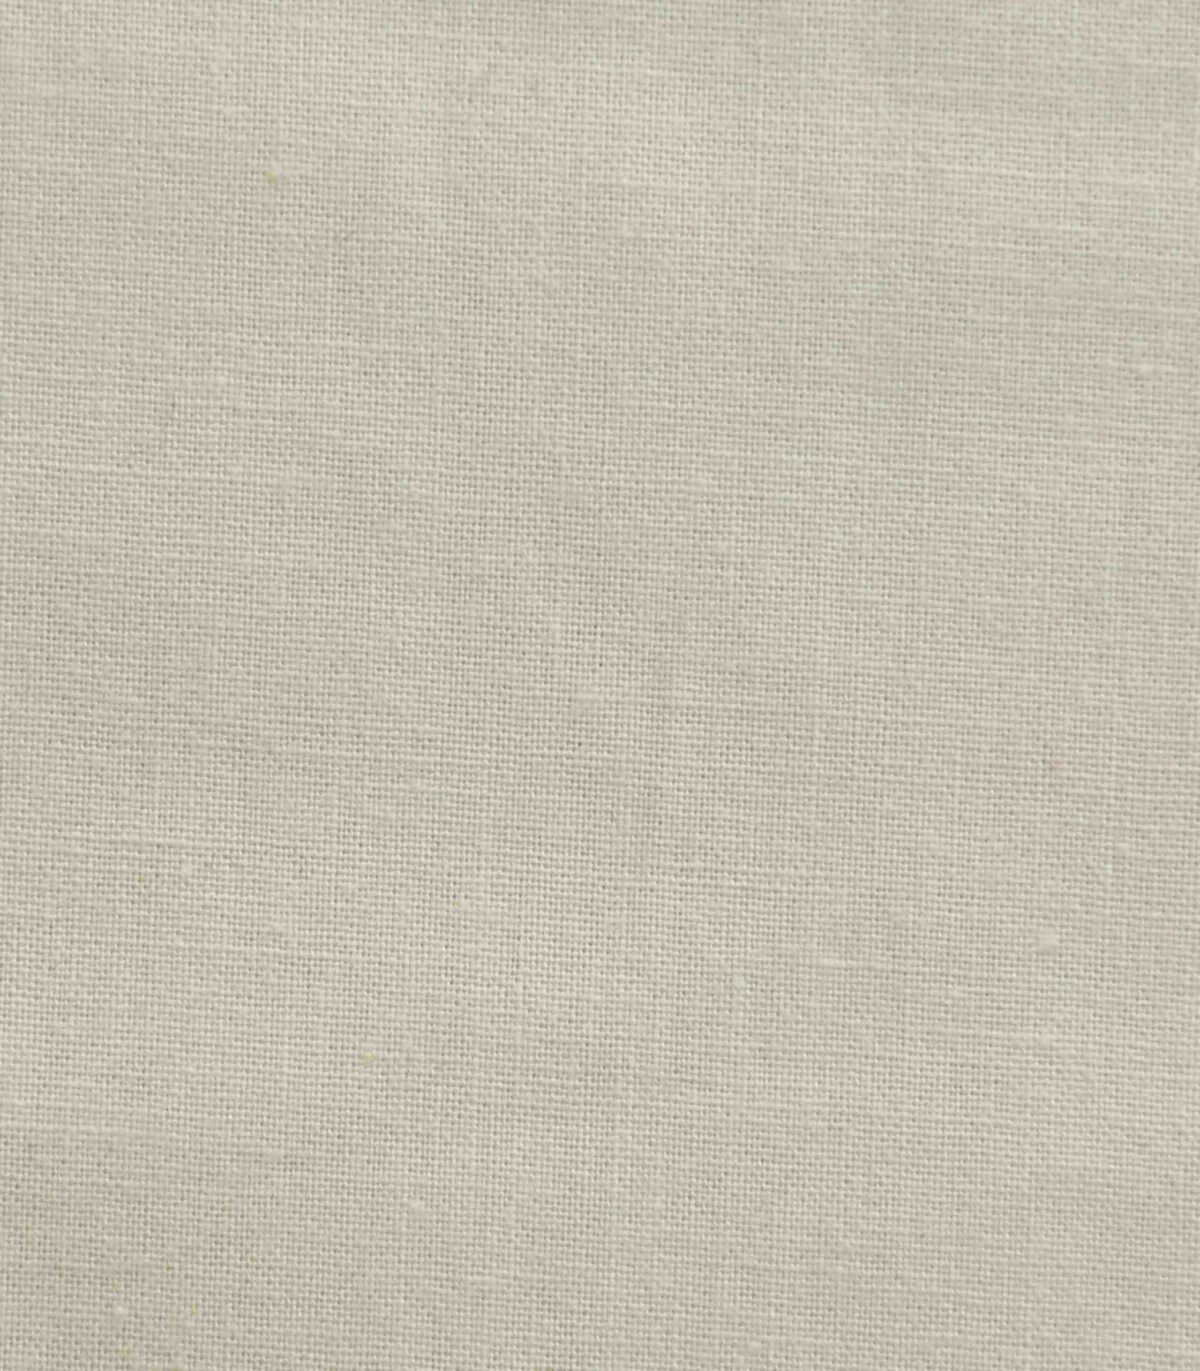 Cotton Cream Color Solid Dyed Fabric